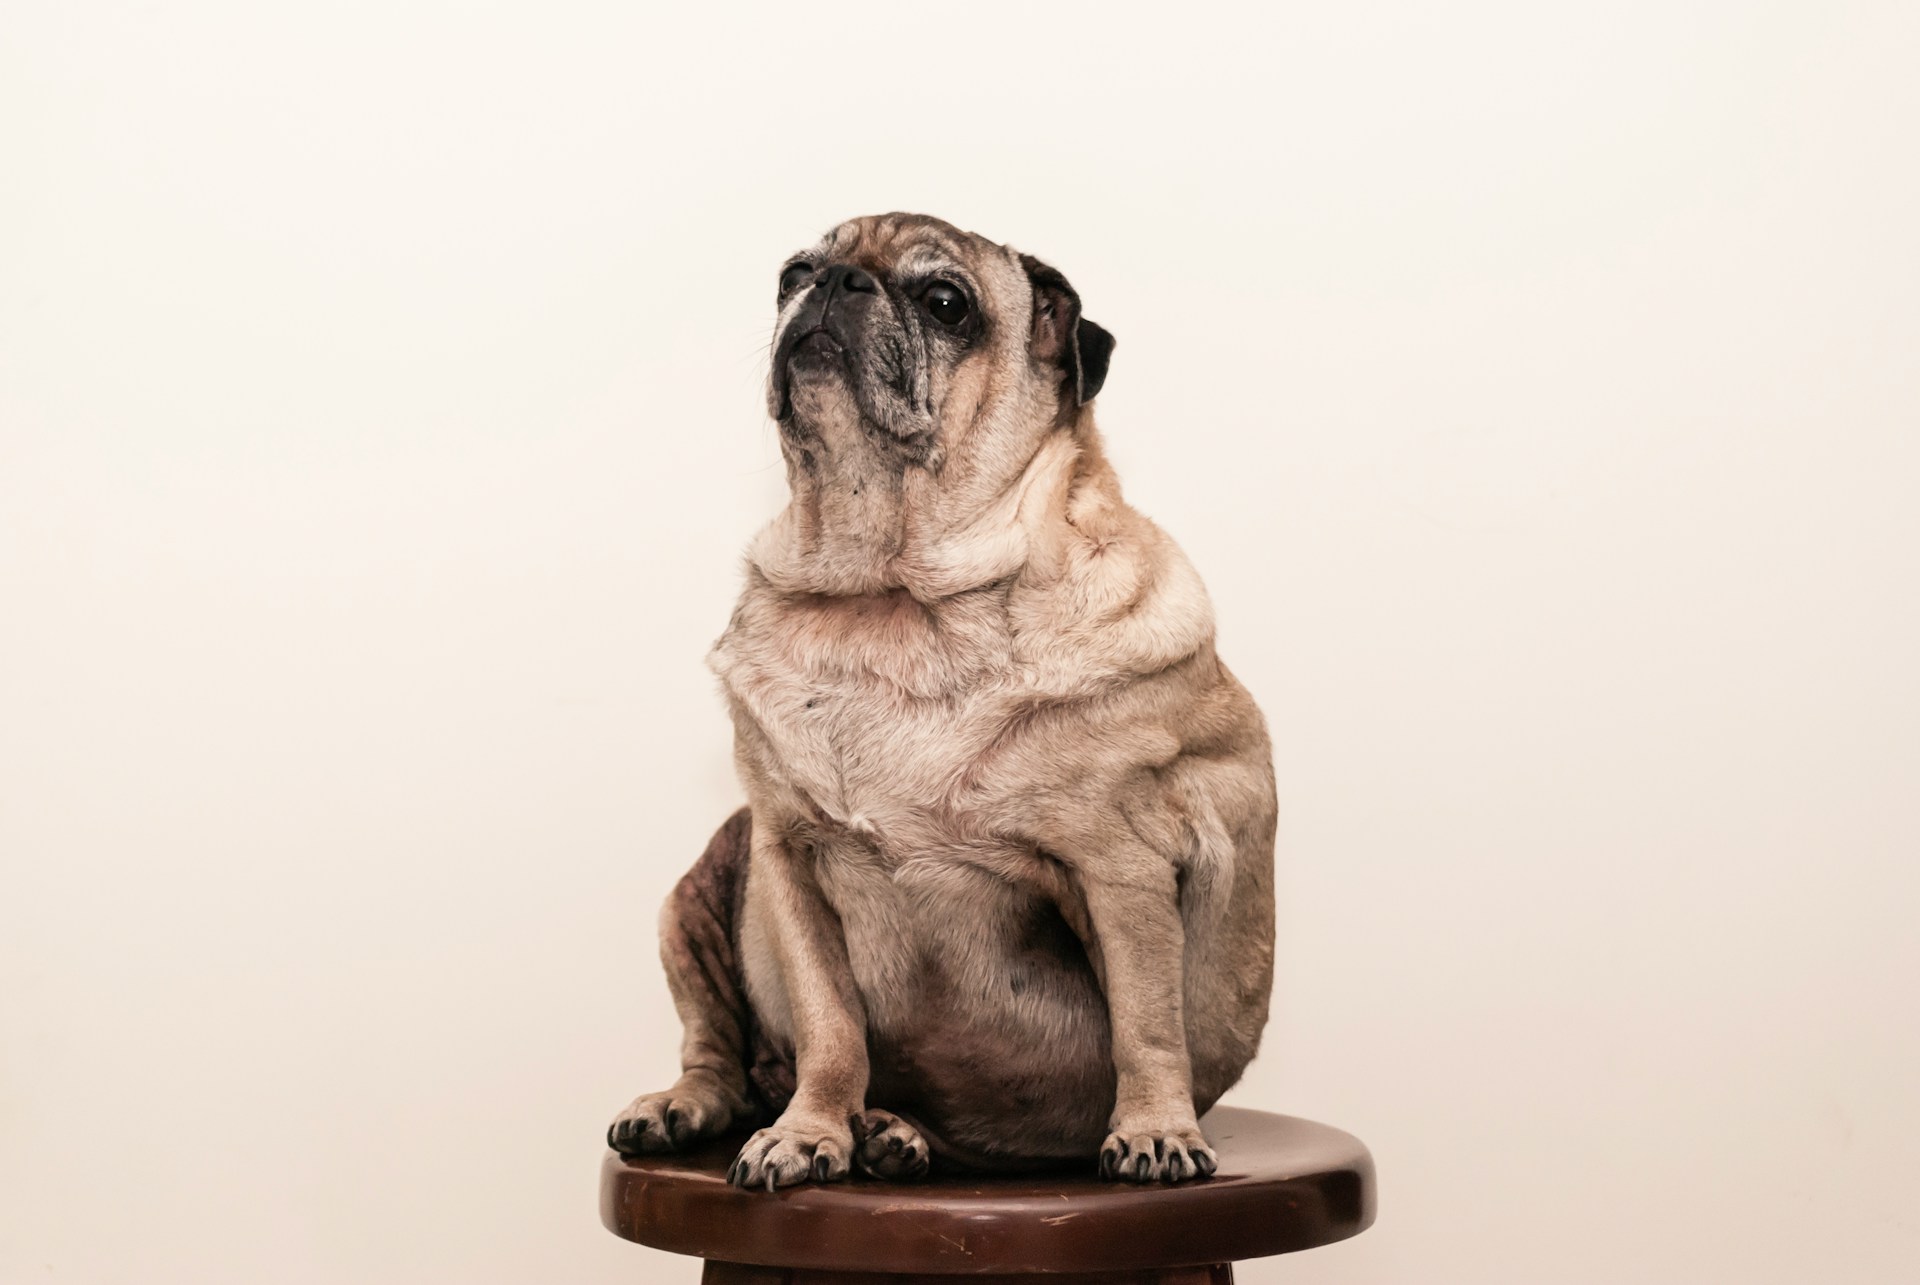 A tan pug on a brown wooden stool